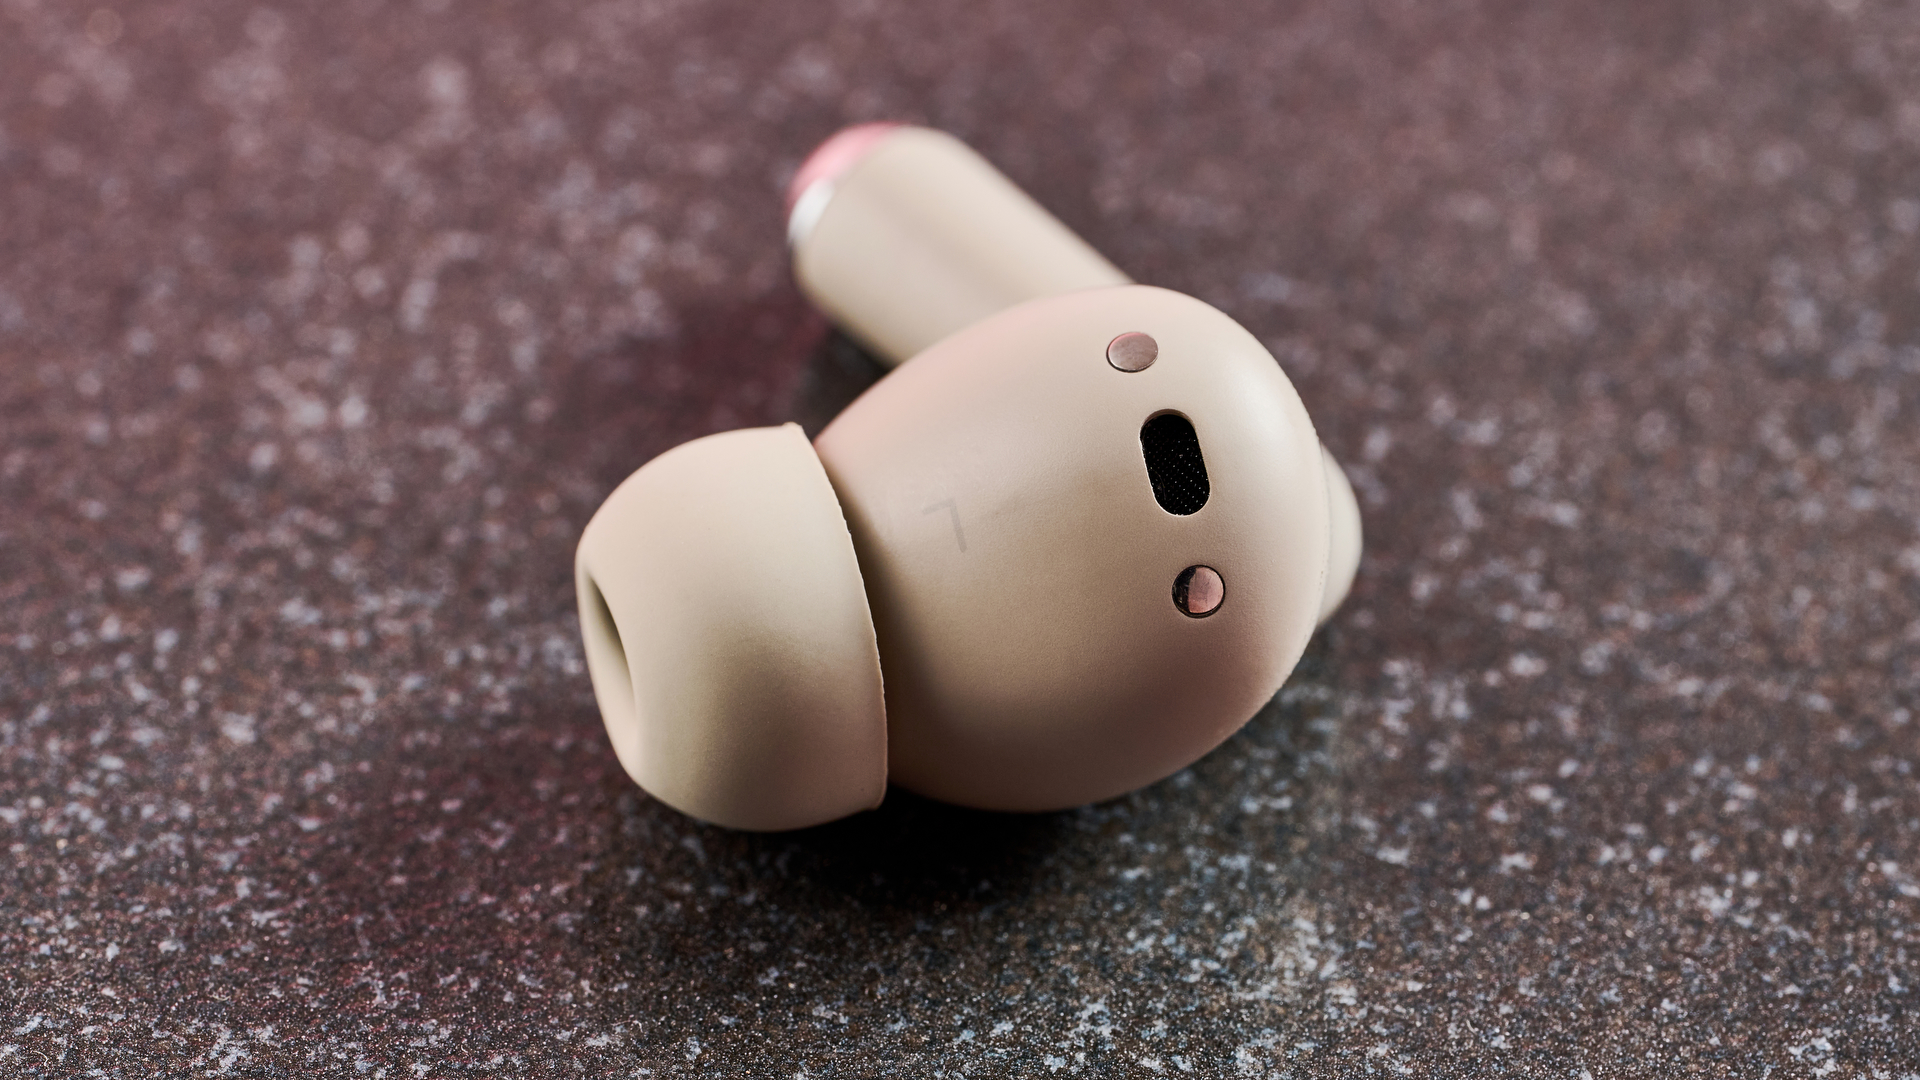 A close up view of one of the Motorola Moto Buds Plus earbuds. You can easily see the silicone tip and the microphone at the top of the ear piece. It is siting on a dark work surface.